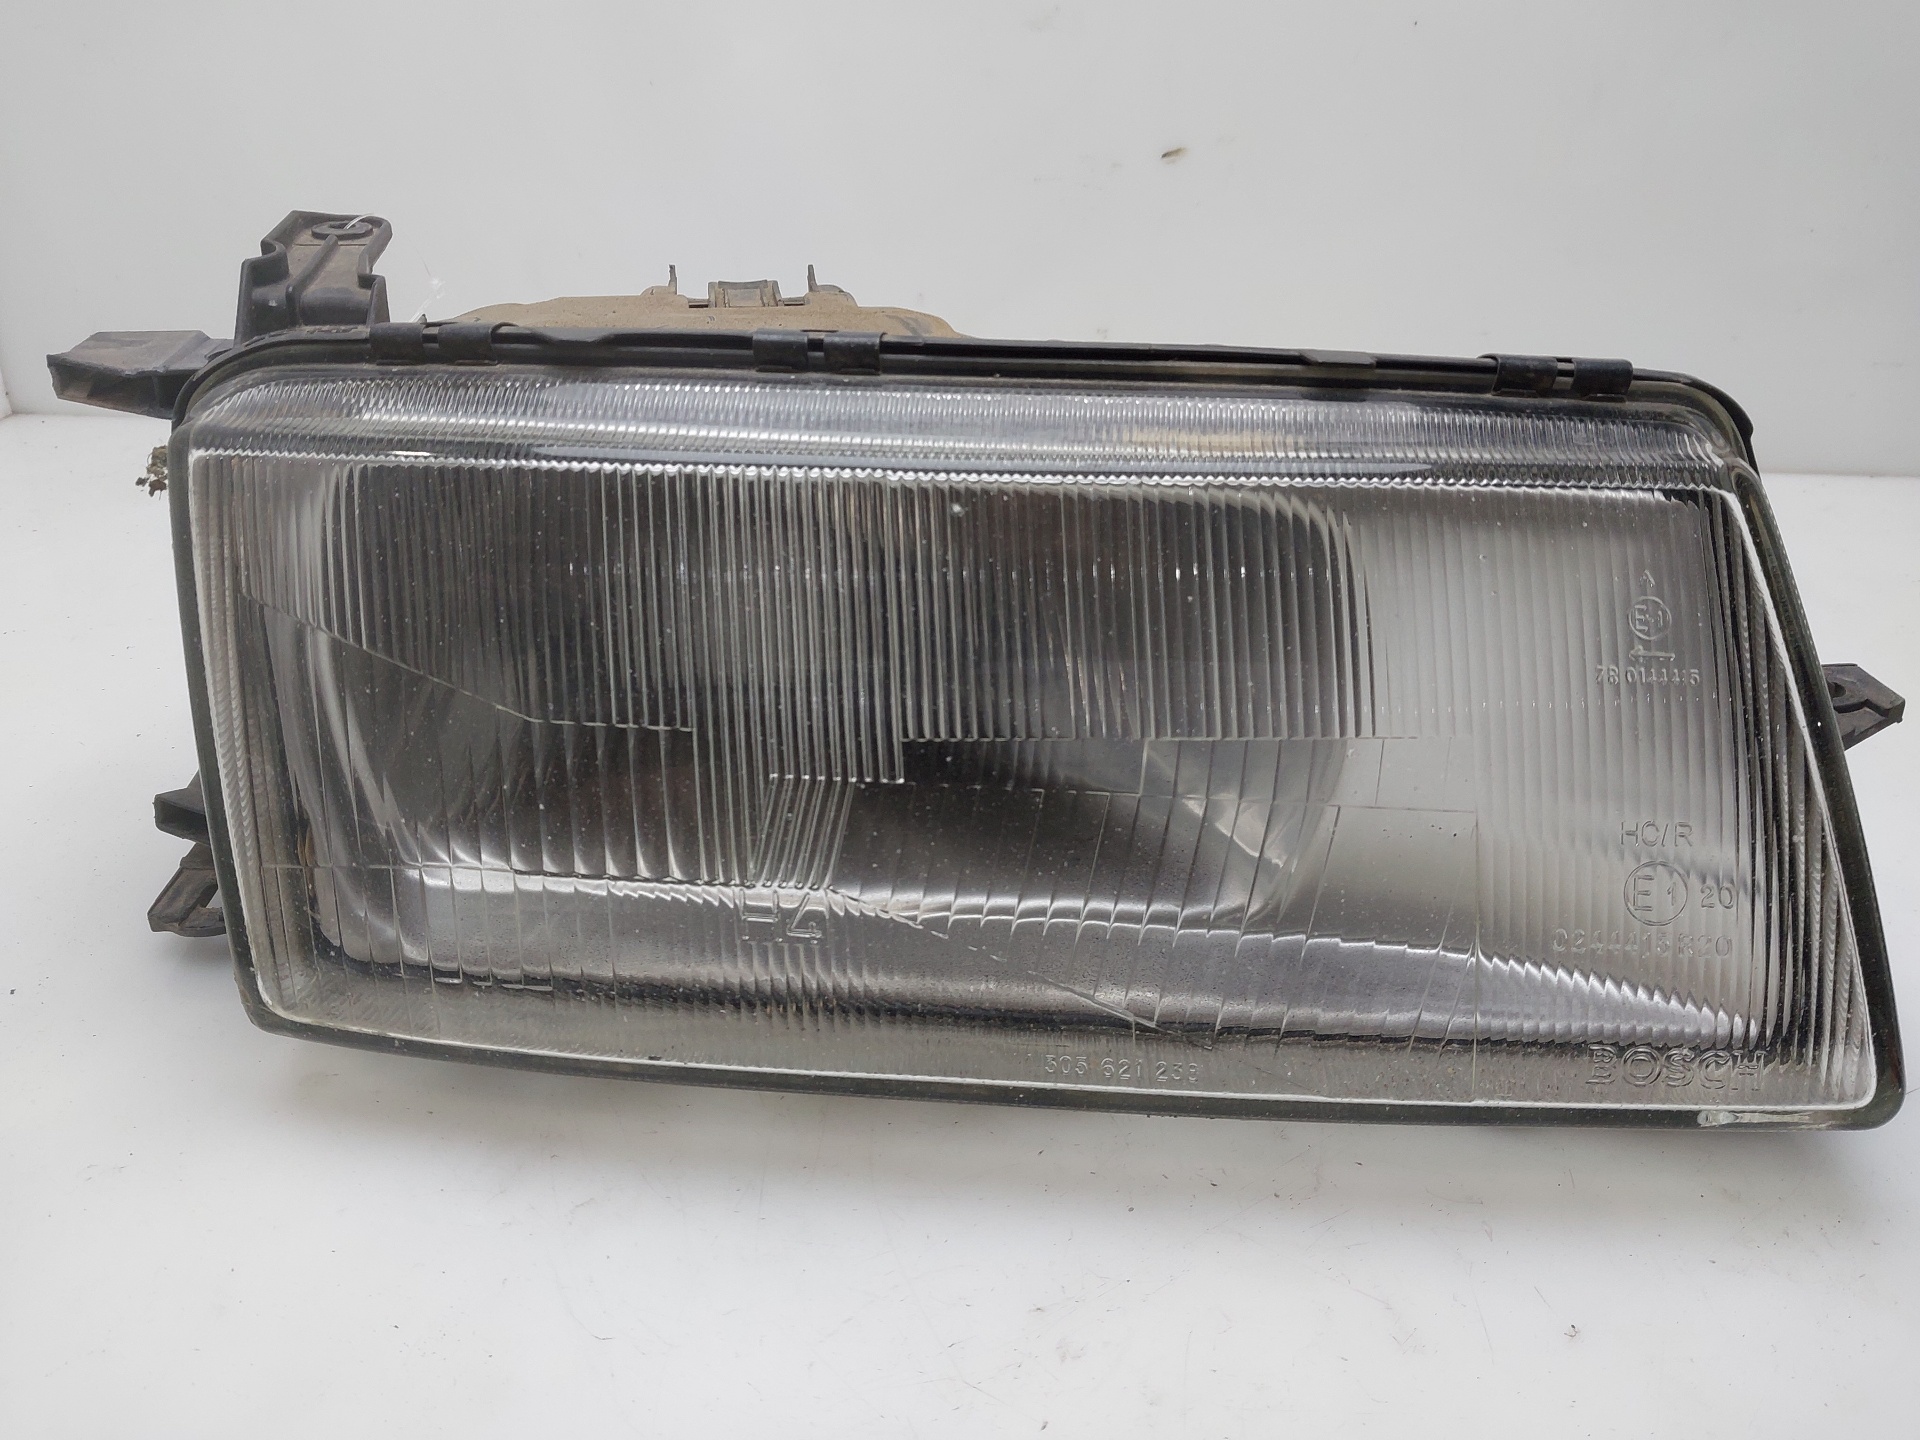 OPEL Vectra A (1988-1995) Front Right Headlight 90228444 23814380